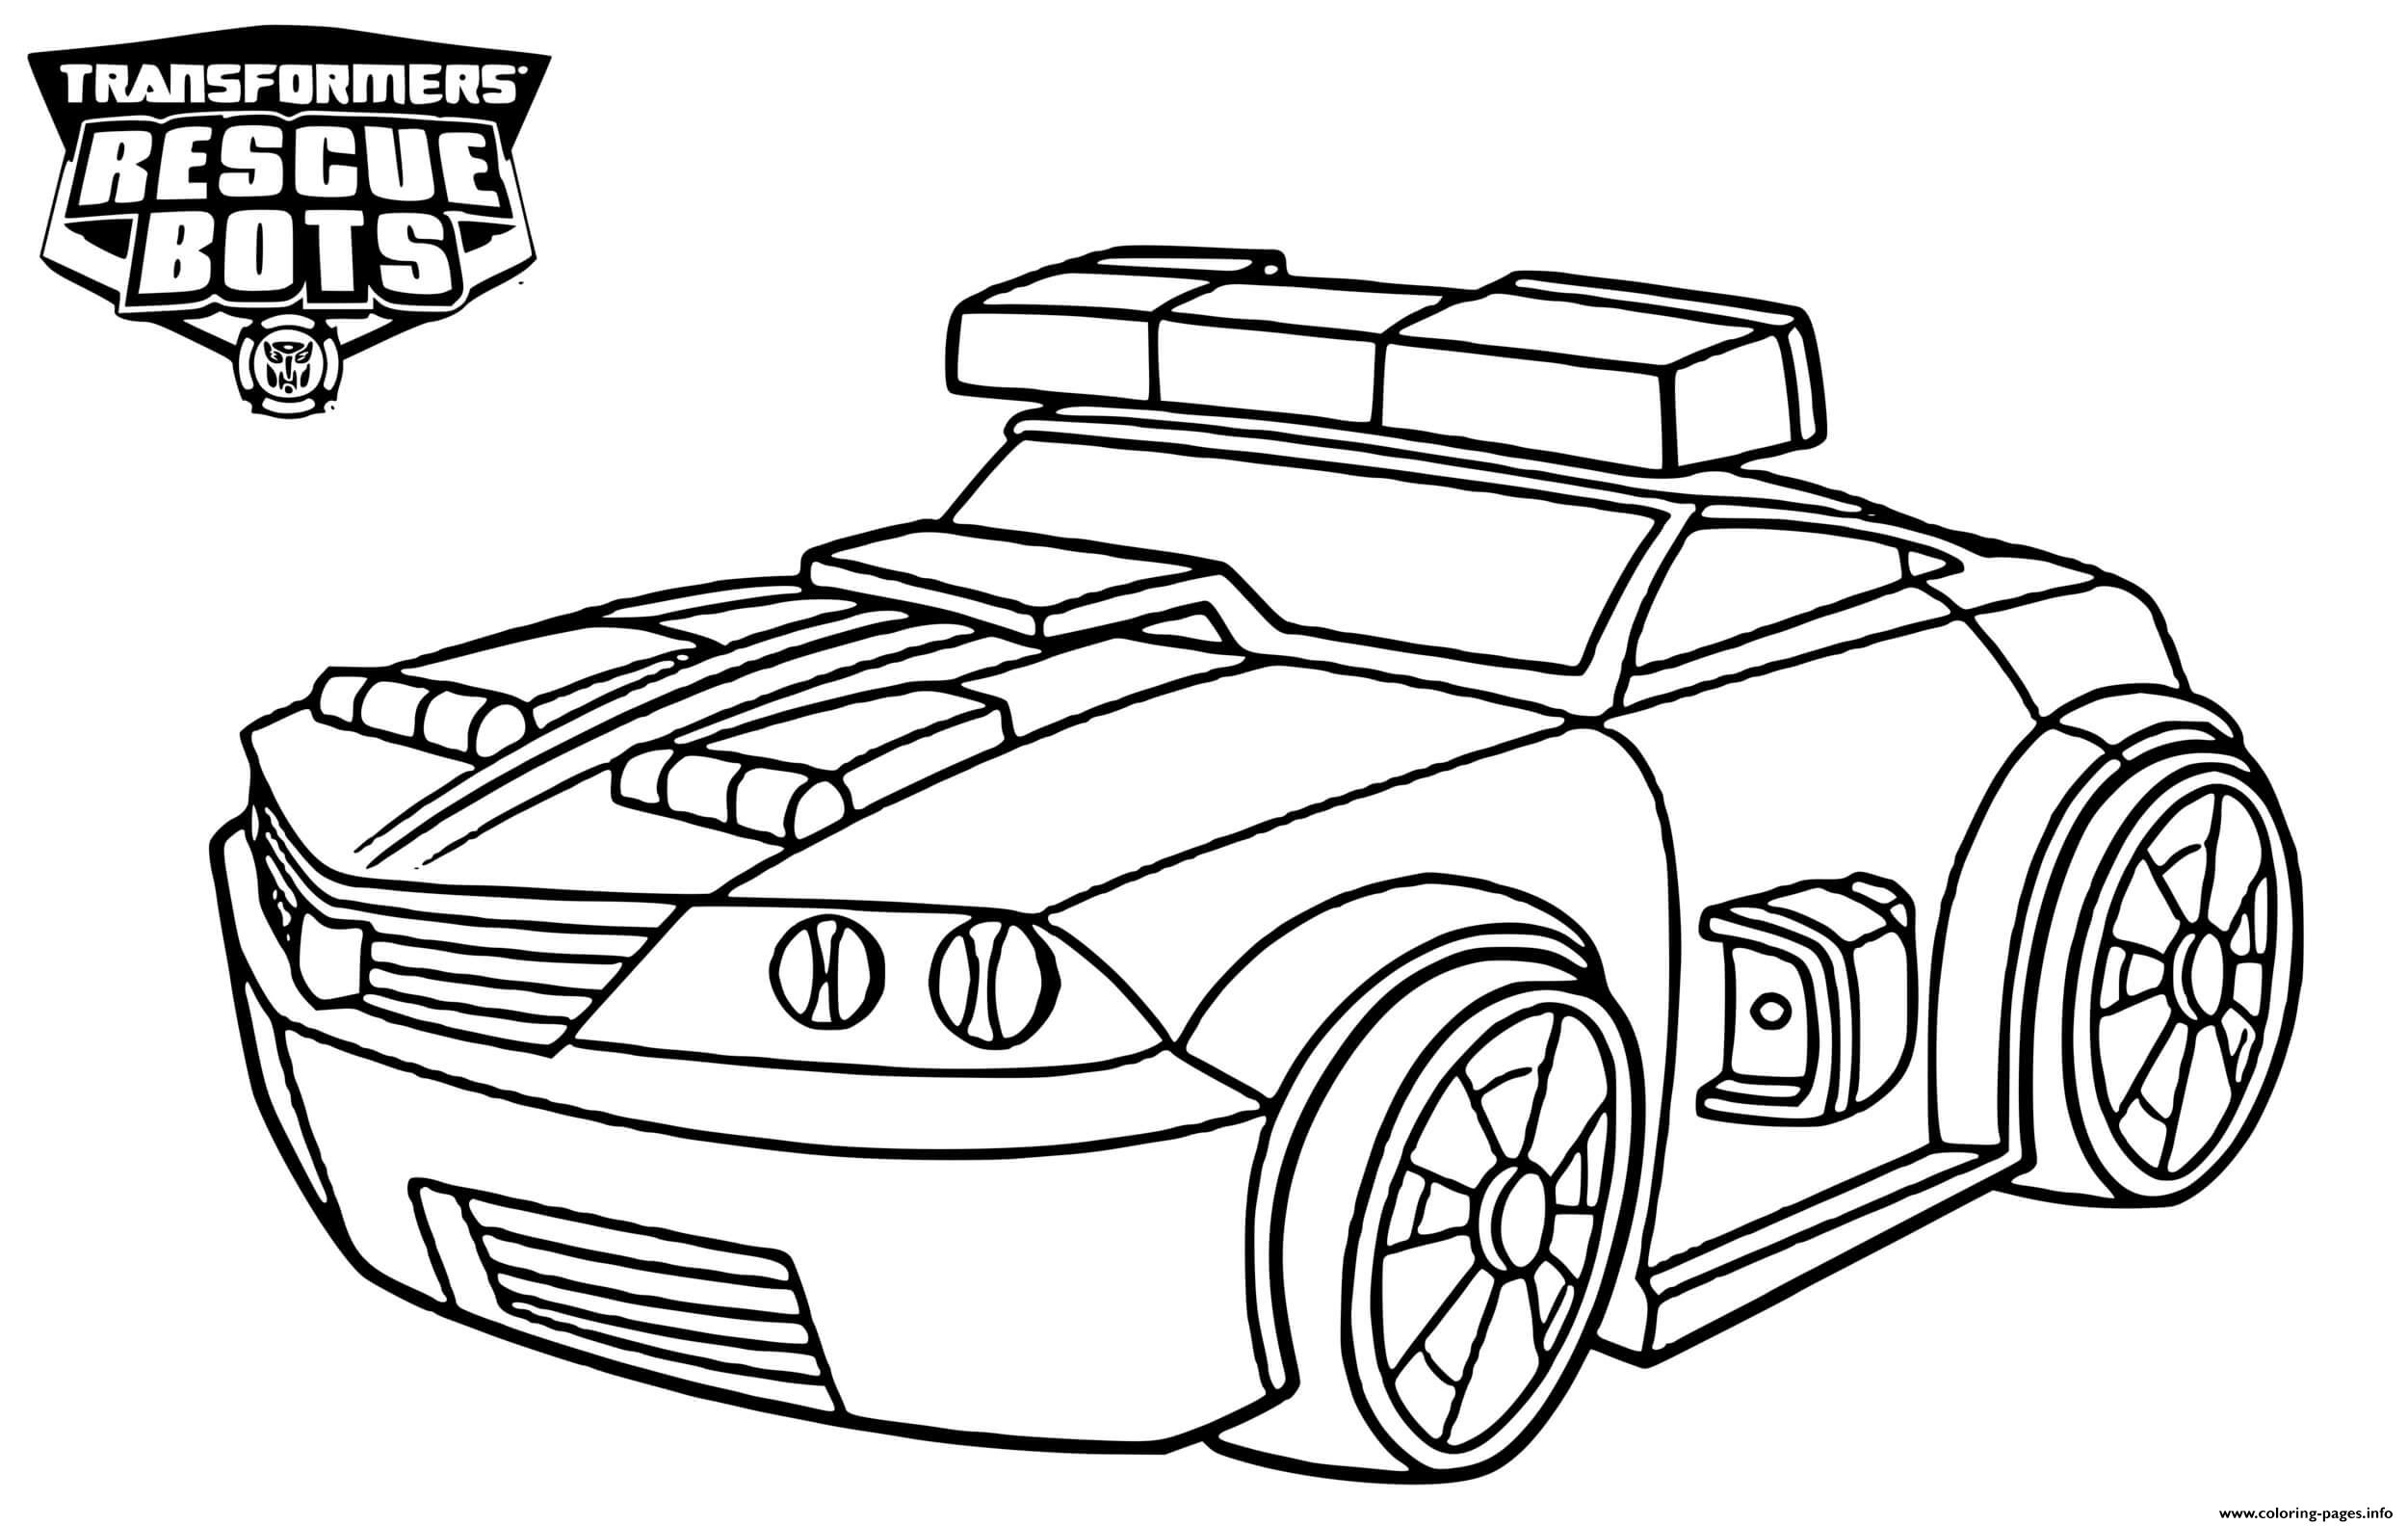 Transformers Rescue Bots The Police Bot Chase Coloring page Printable